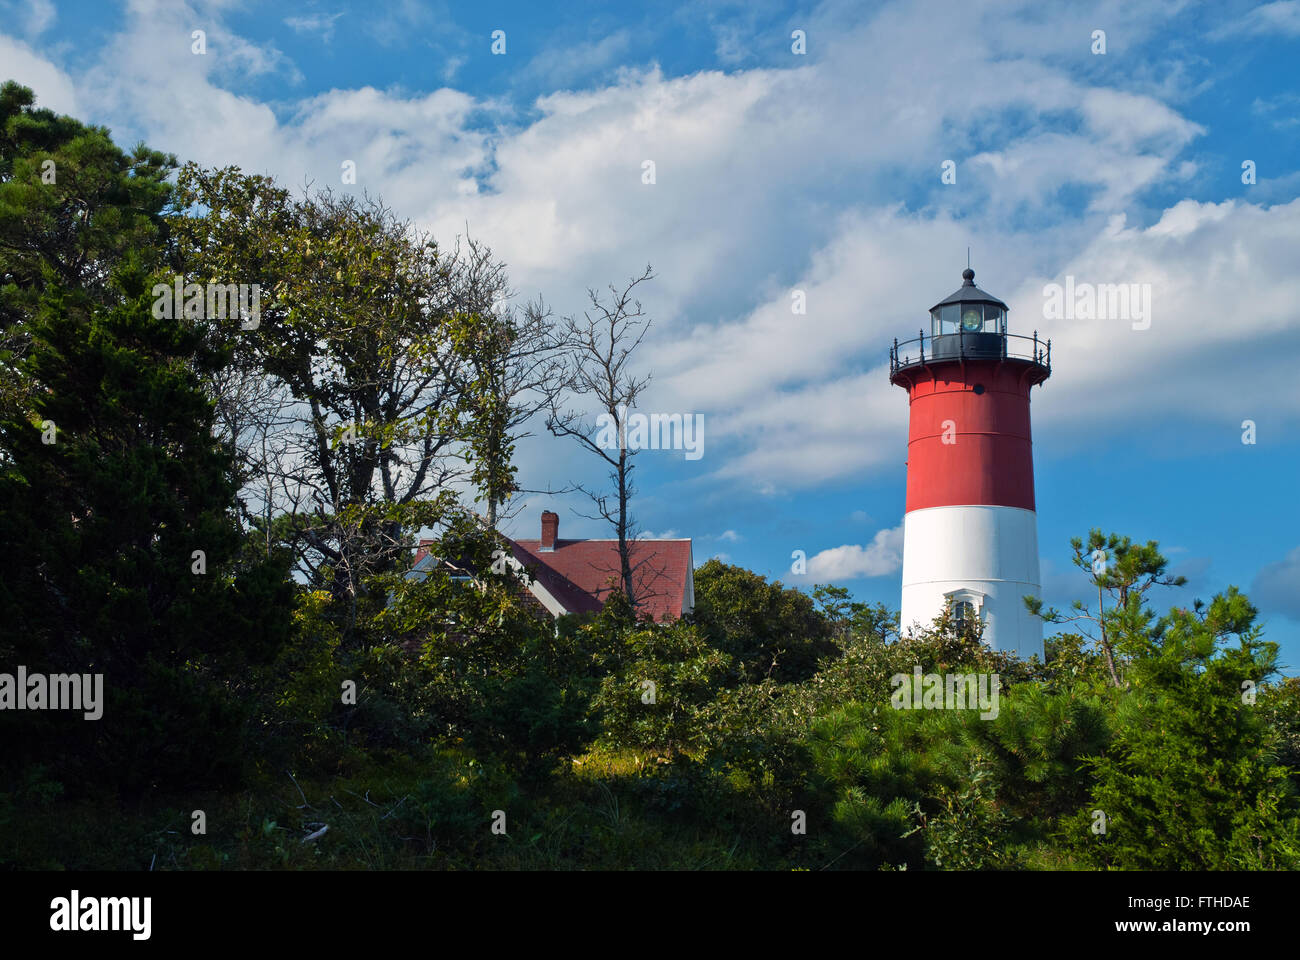 Nauset lighthouse lantern still shines on a sunny summer day with clouds. It has a unique red and white striped tower. Stock Photo